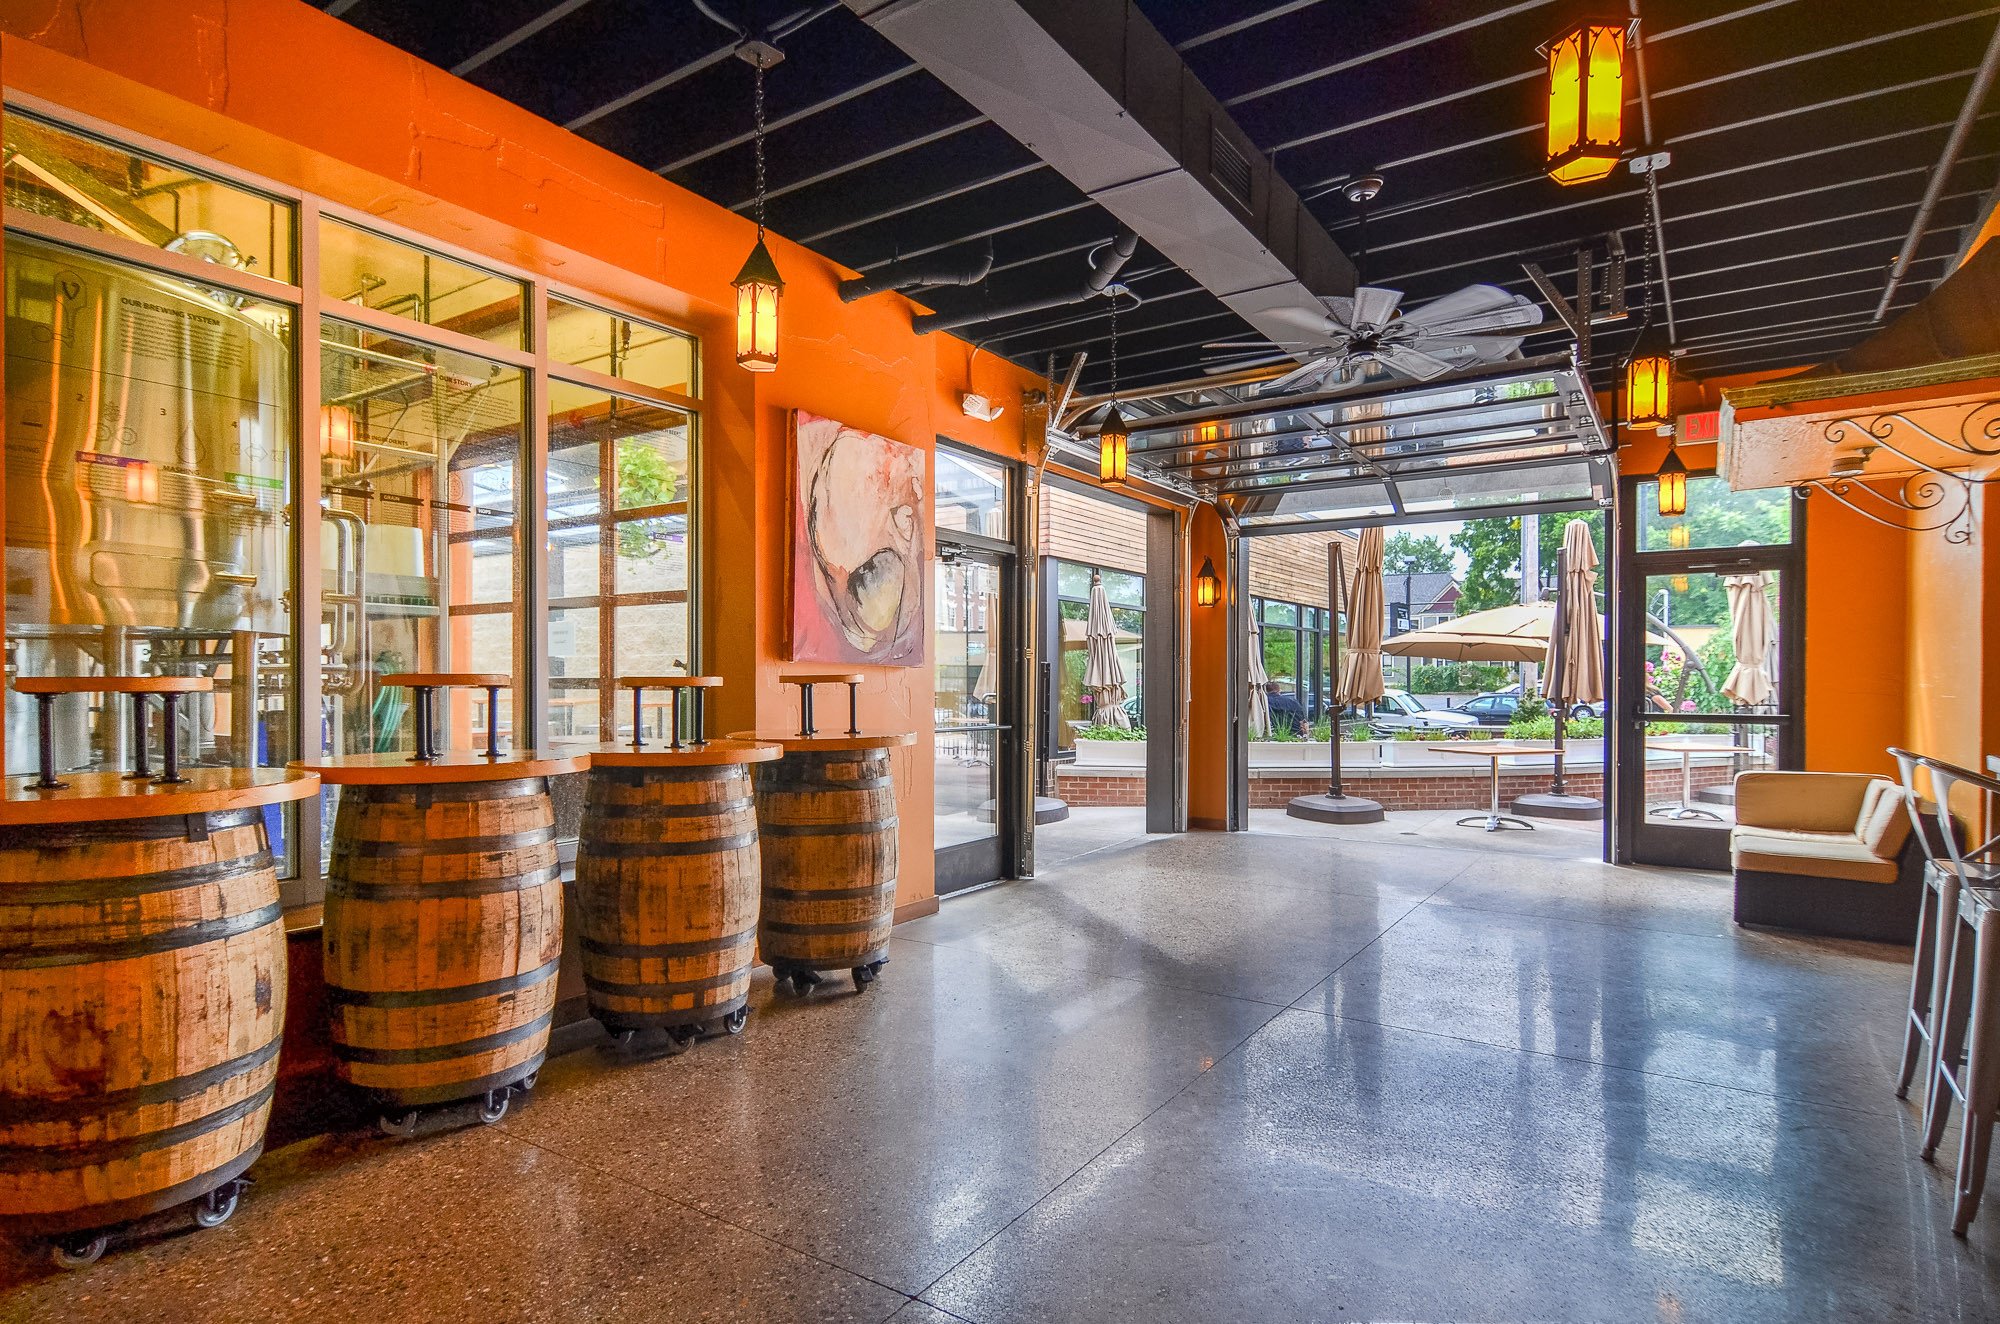 Interior of Walloon Room with barrel tables, orange wall with window to brewery and glass garage door on far end.